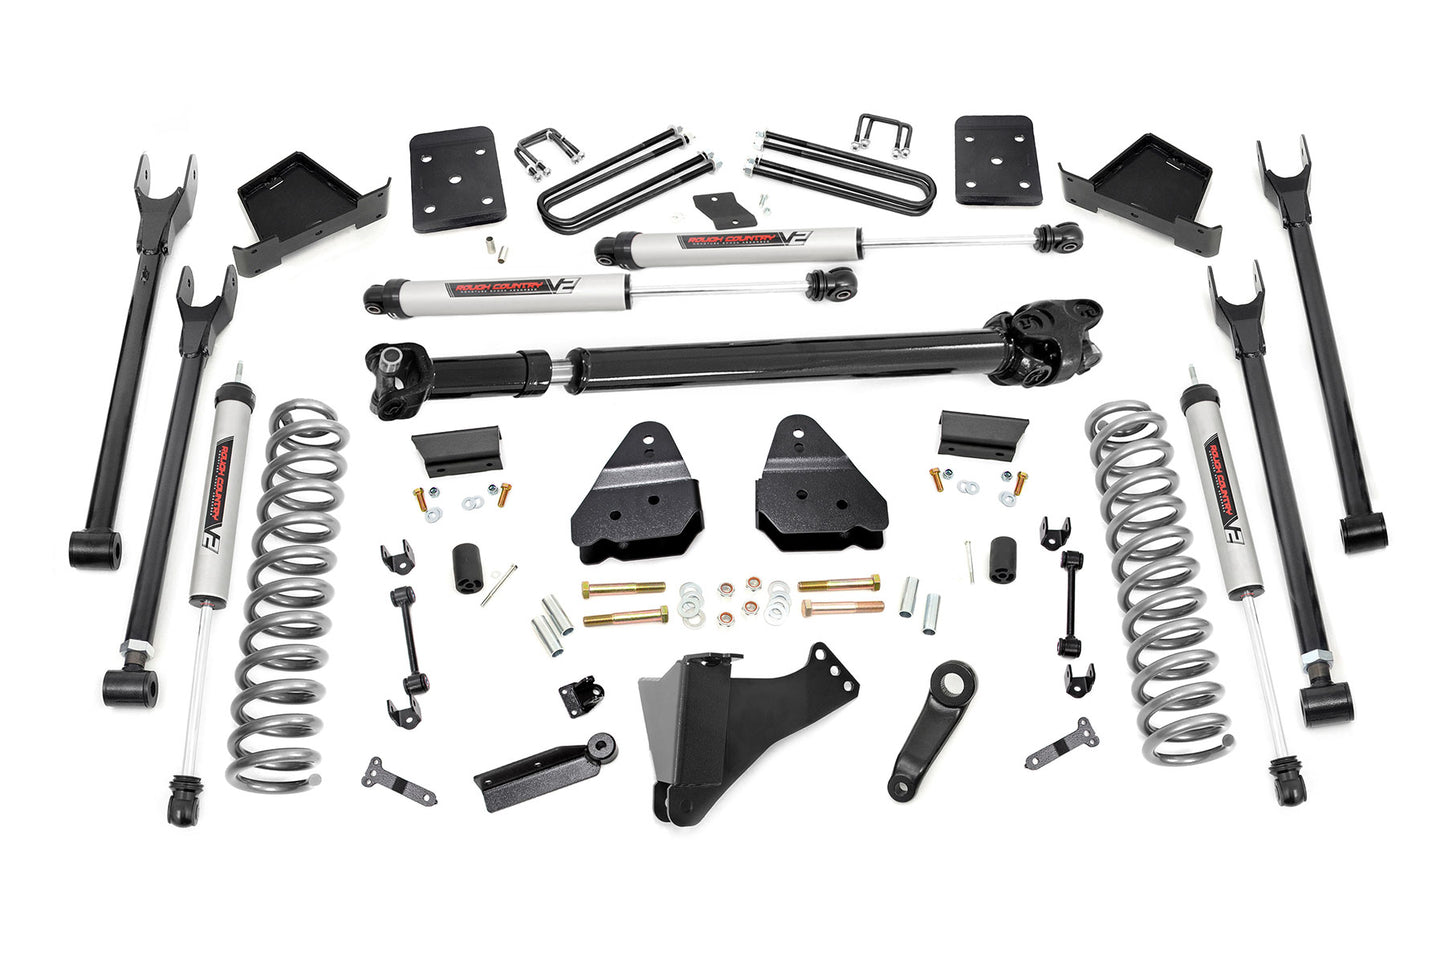 Rough Country (52671) 6 Inch Lift Kit | 4-Link | No OVLD | D/S | V2 | Ford F-250/F-350 Super Duty (17-22)